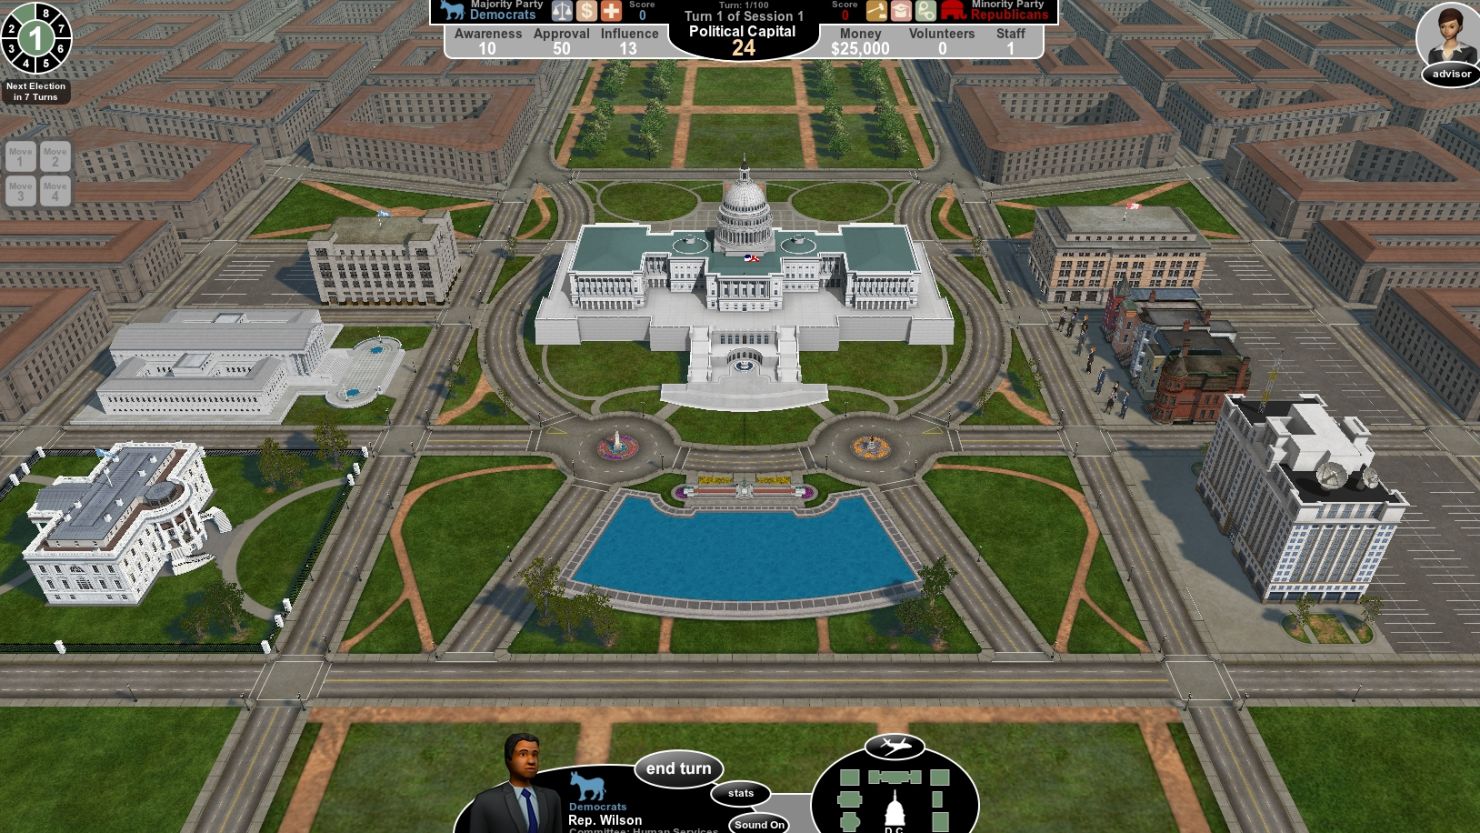 In "Government in Action," players are newly elected representatives whose party and home district are determined for them.